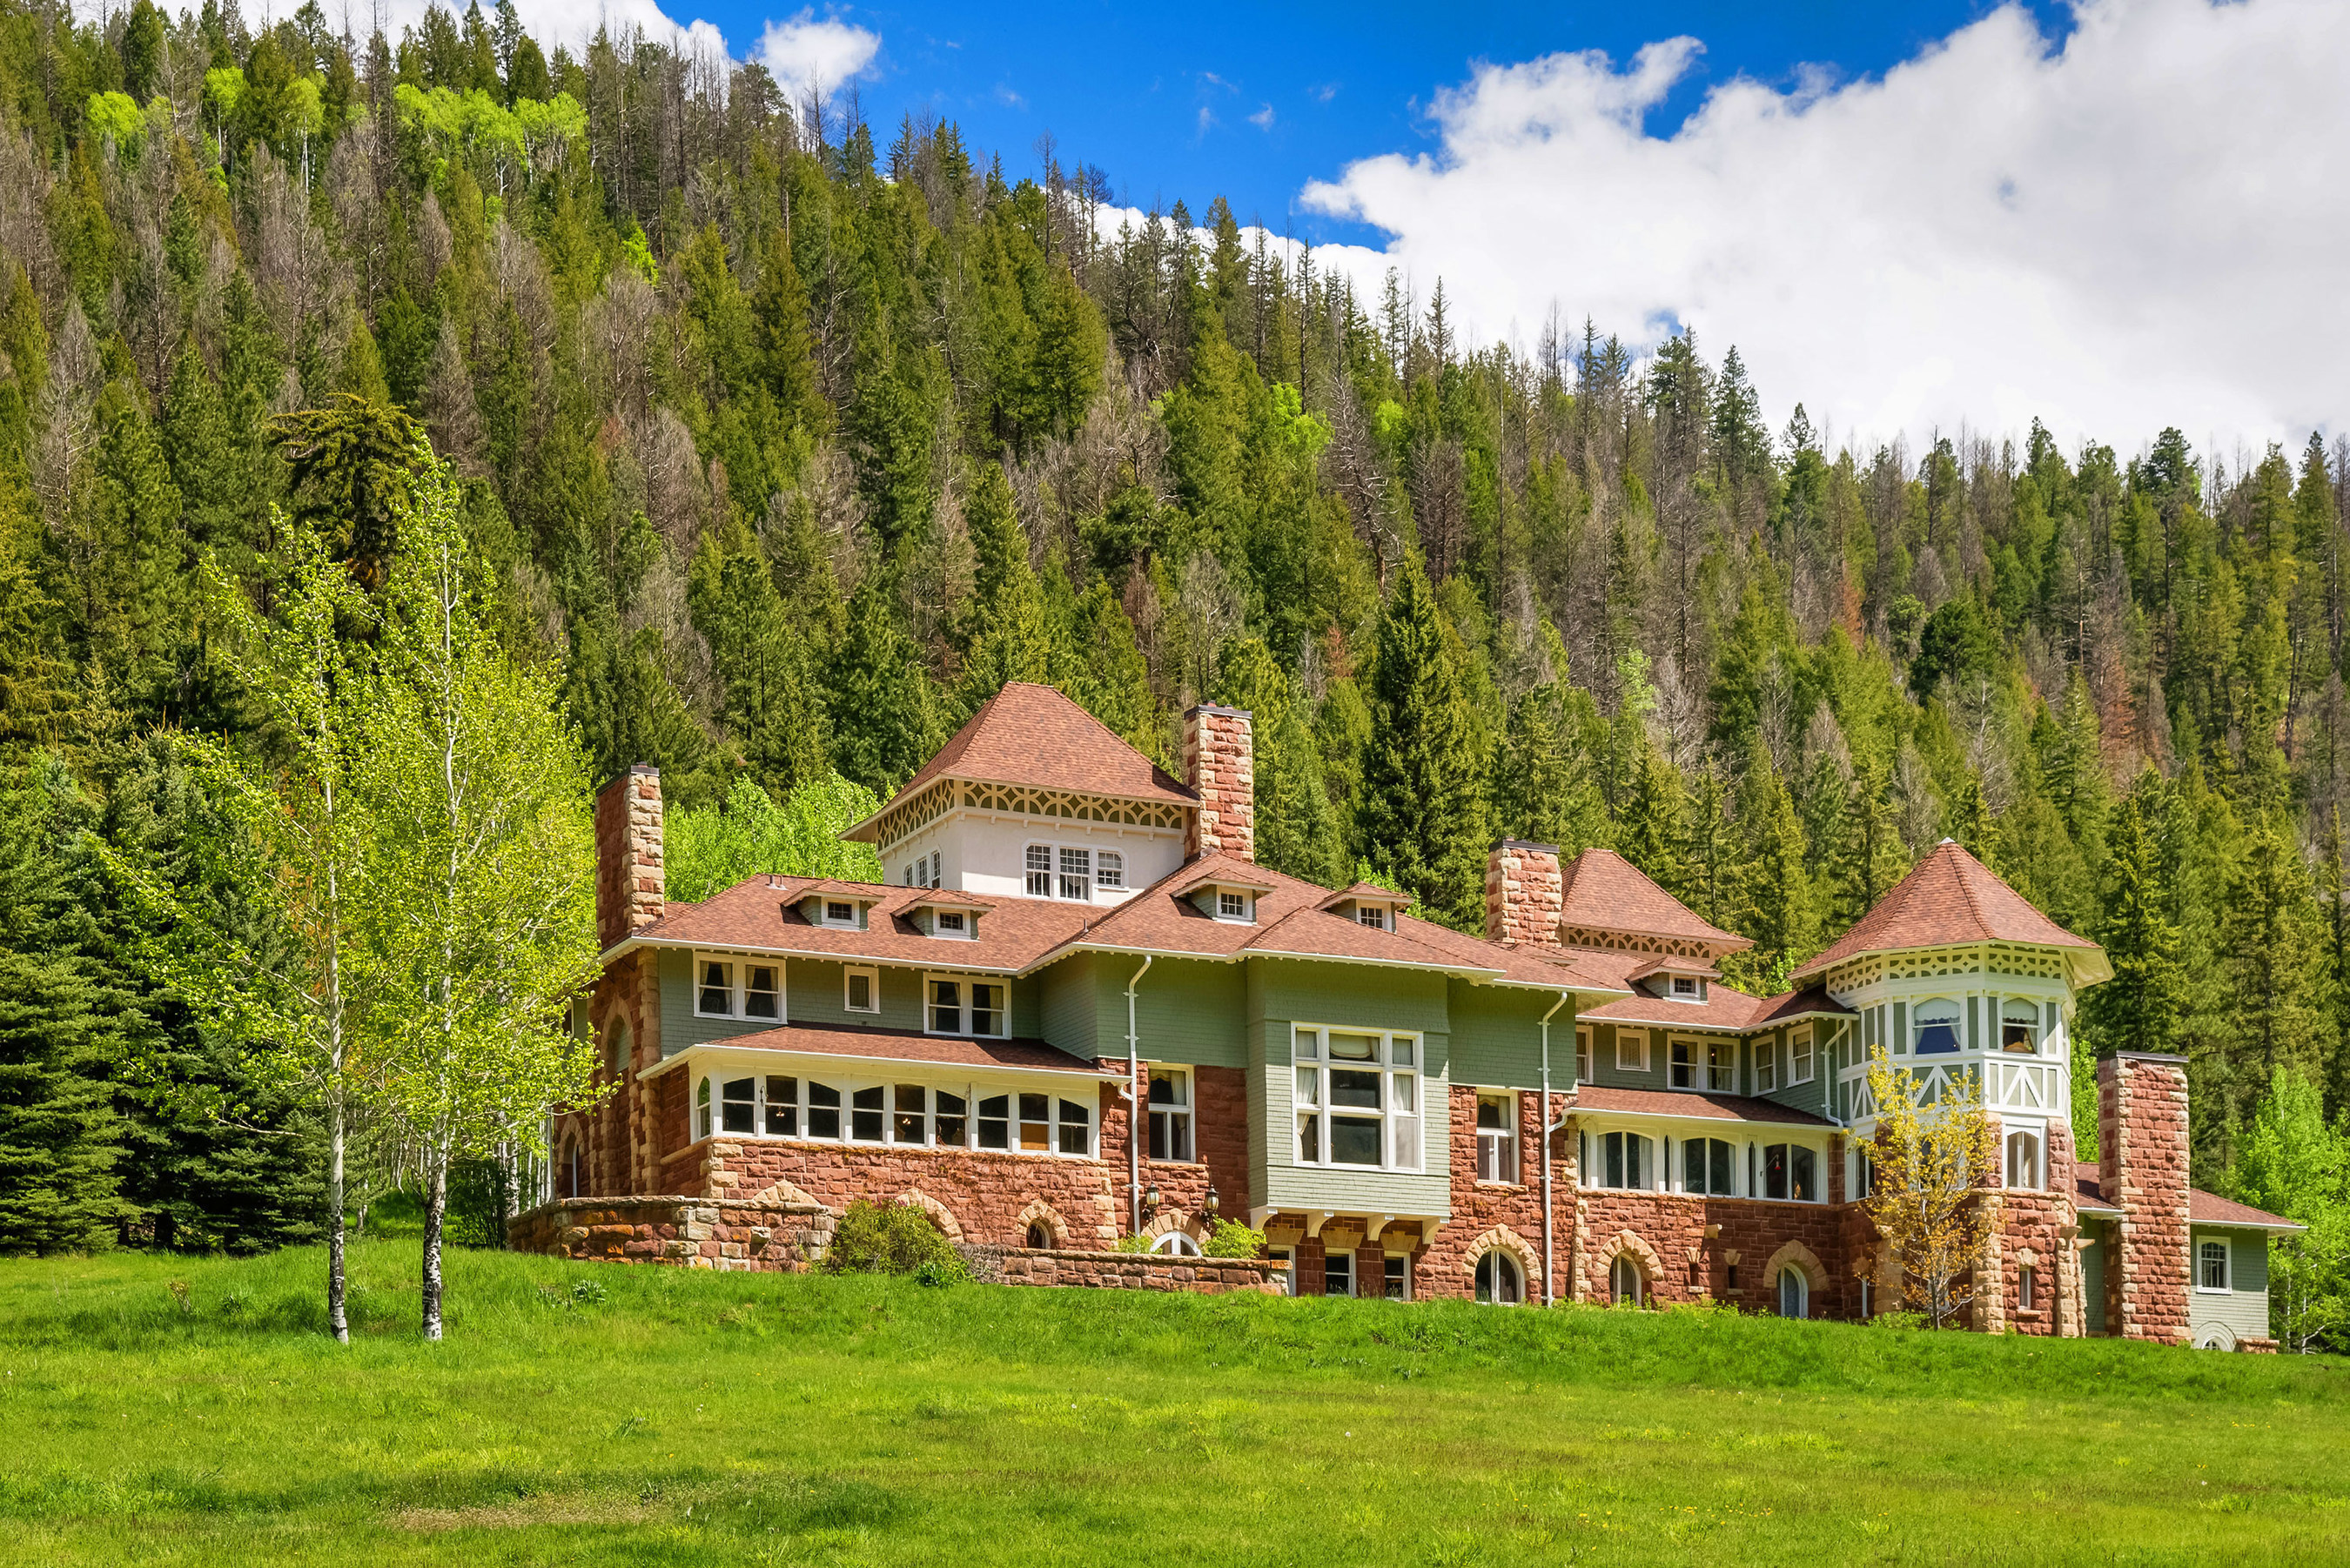 Platinum Luxury Auctions has announced the upcoming auction of Redstone Castle, in Redstone, Colorado. Located just outside Aspen, the castle was built for industrialist John Cleveland Osgood, who was the 6th wealthiest man in America in 1900. Though recently listed for $7.5 million, the Castle will be sold at a live auction on October 7, 2016 to the highest bidder above only $2 million. The historic, 42-room mansion sits on 150 private acres, and also includes a 4,700-sq. ft. carriage house with 12 horse stalls. Platinum is managing the sale in cooperation with listing brokerage Aspen-Snowmass Sotheby's International Realty. Learn more at COLuxuryAuction.com.